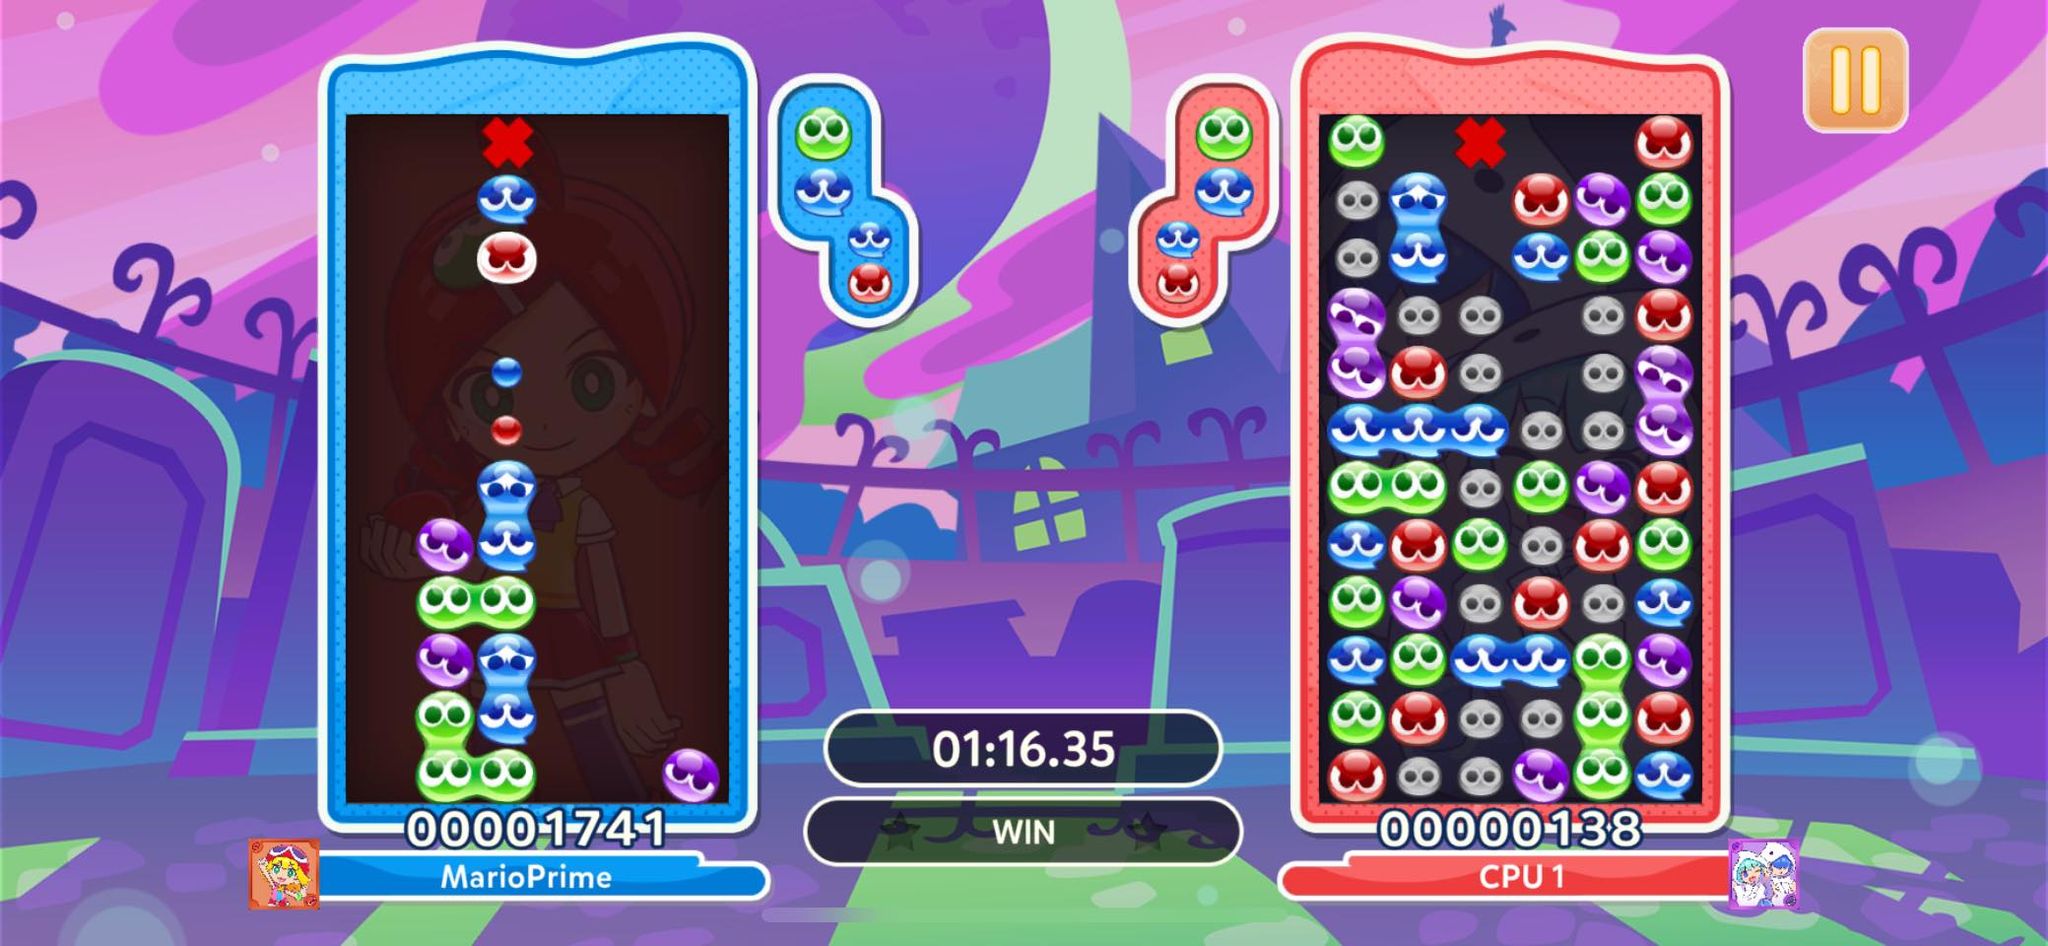 Two players compete in Puyo Puyo Puzzle Pop.